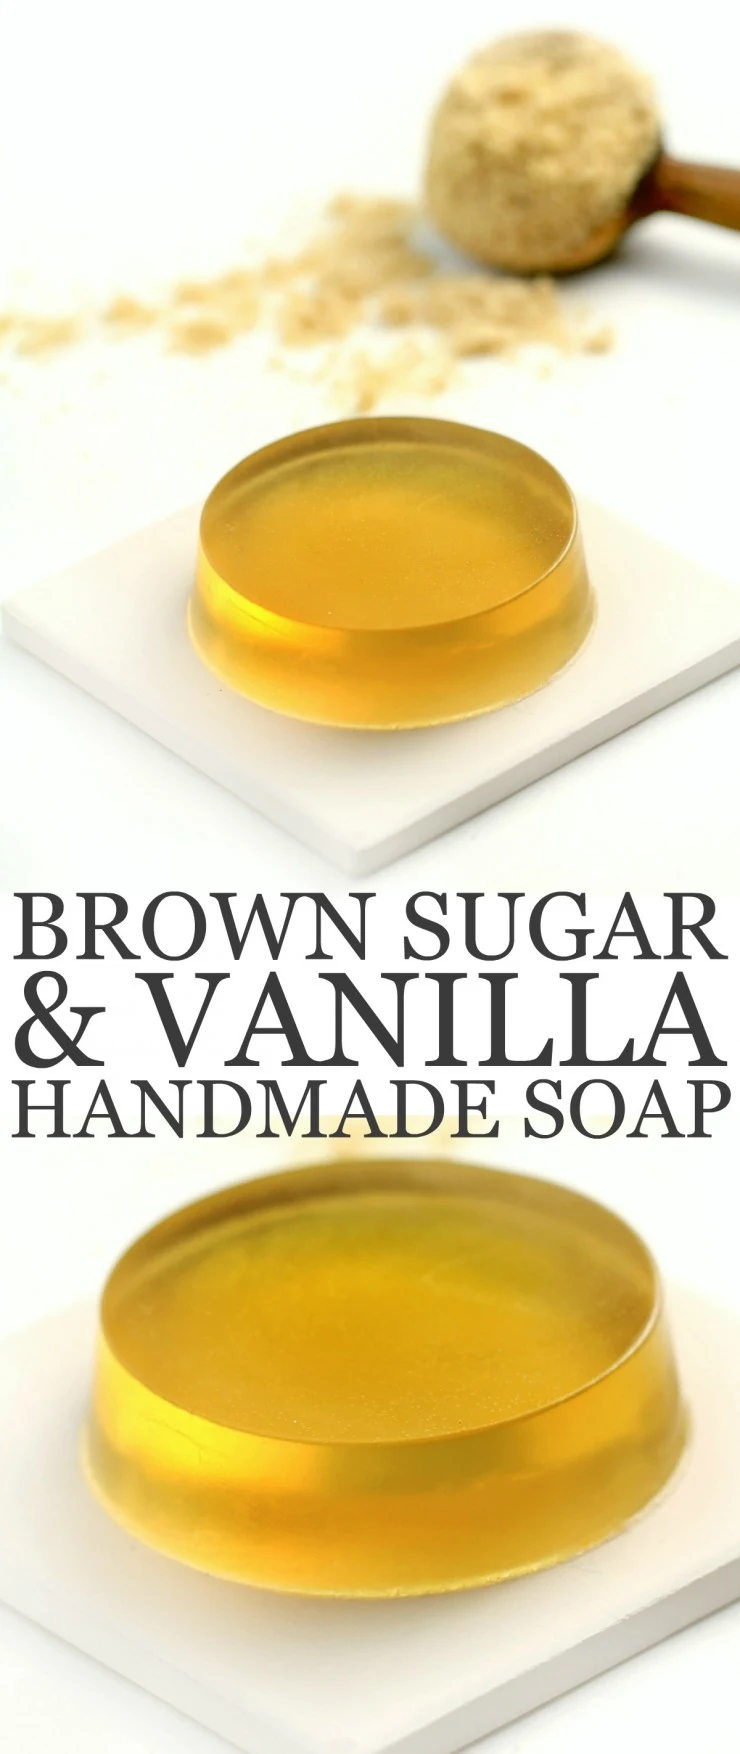 The Brown Sugar in this Brown Sugar and Vanilla Handmade Soap gives it a beautiful translucent golden colour with a light and sweet scent enhanced by the vanilla essential oil. 